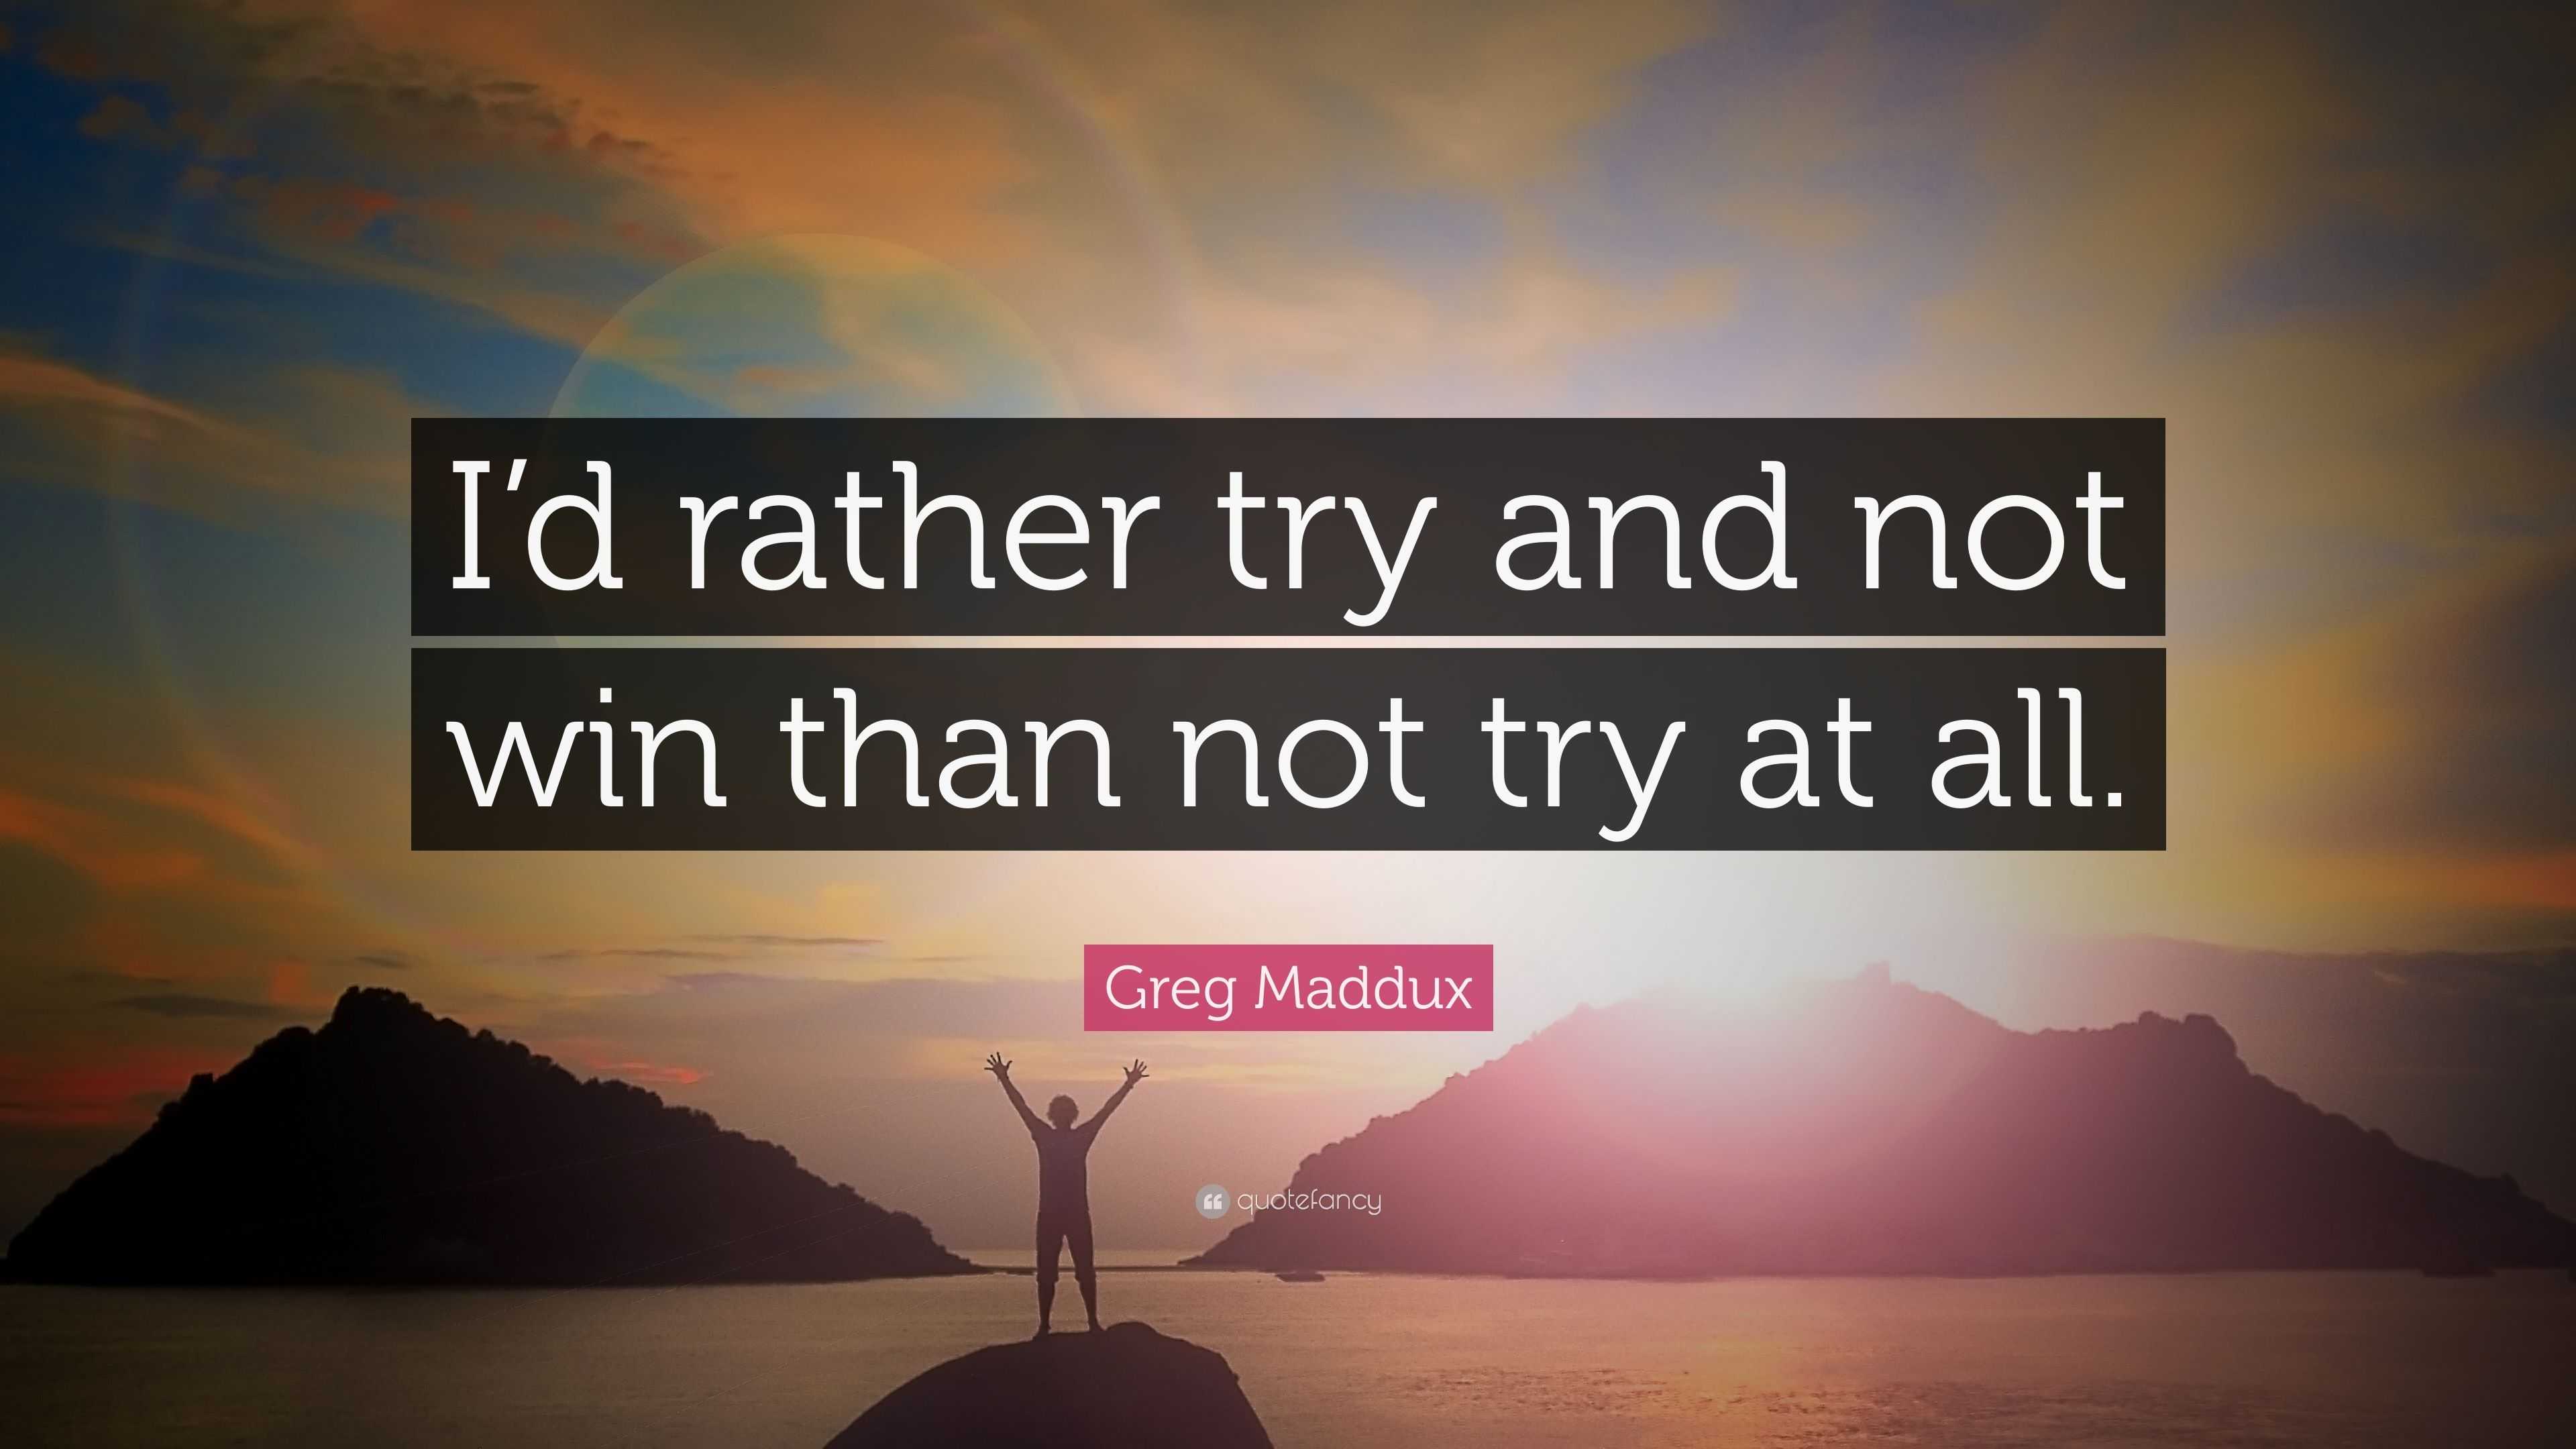 Greg Maddux Quote: “I'd rather try and not win than not try at all.”